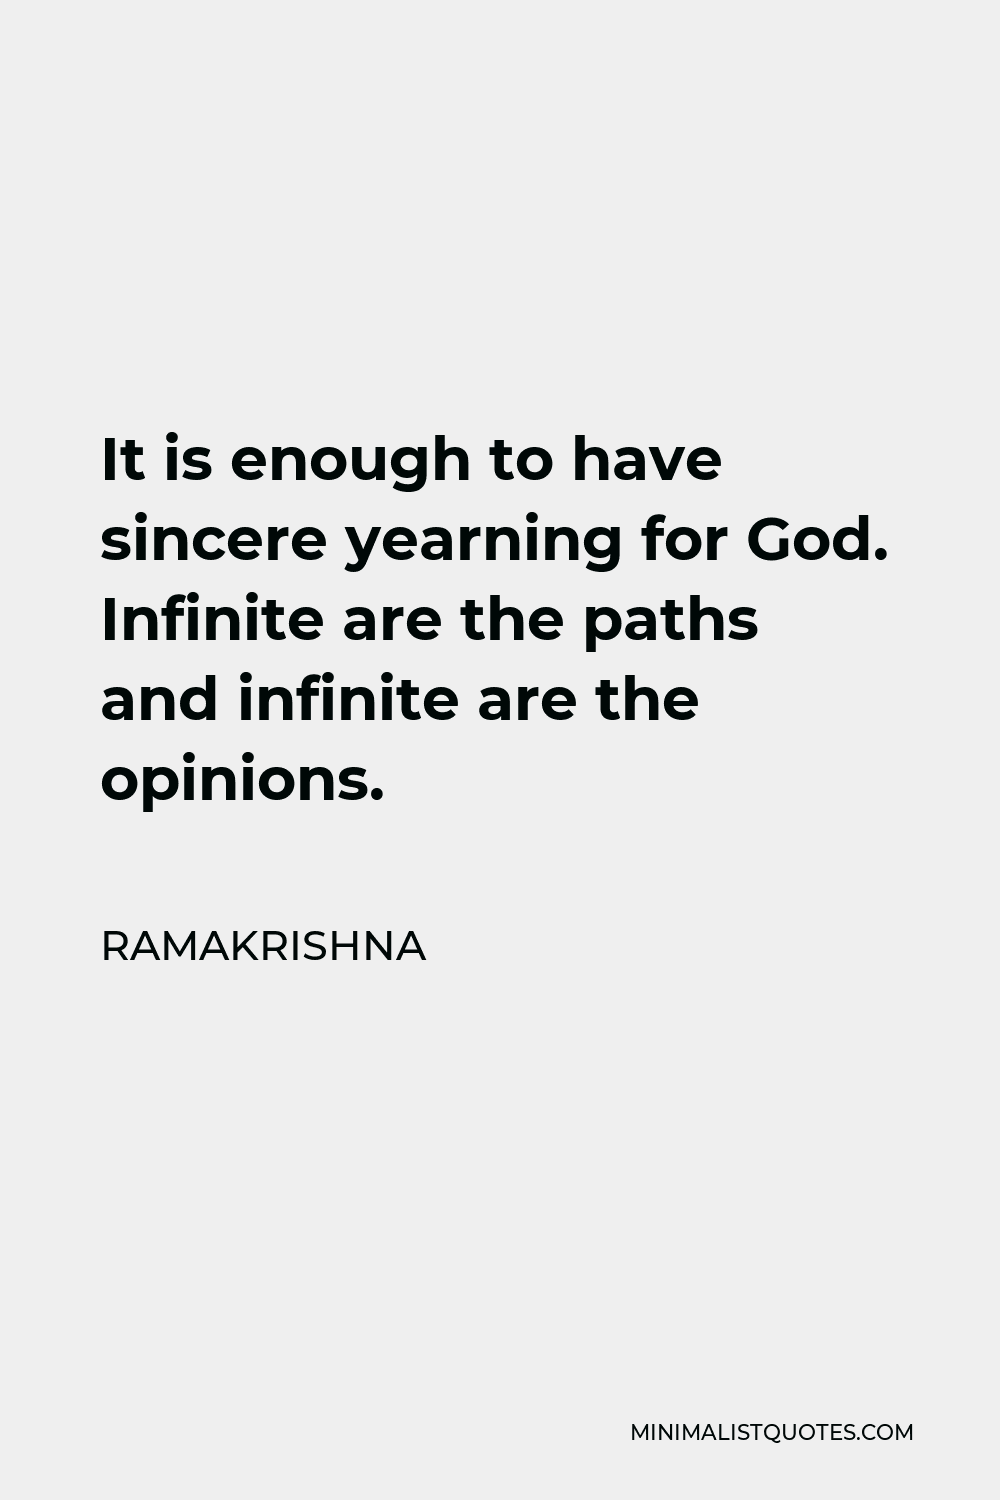 Ramakrishna Quote - It is enough to have sincere yearning for God. Infinite are the paths and infinite are the opinions.